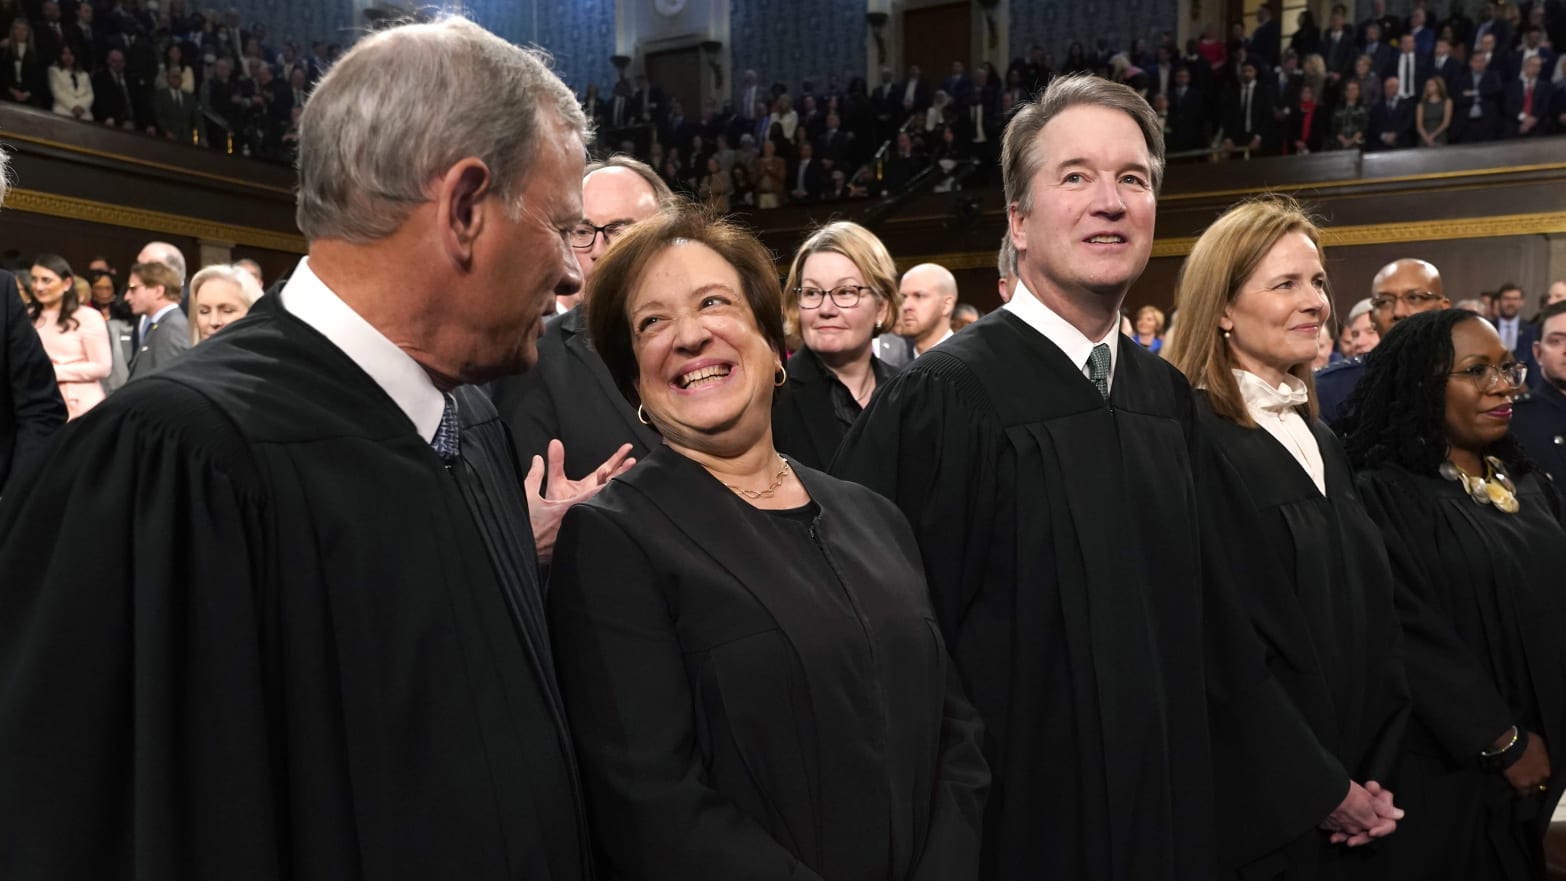 Chief Justice of the United States Supreme Court John Roberts and Justices Elena Kagan, Brett Kavanaugh, Amy Coney Barrett and Ketanji Brown Jackson attend the State of the Union address on February 7, 2023 in Washington, DC.